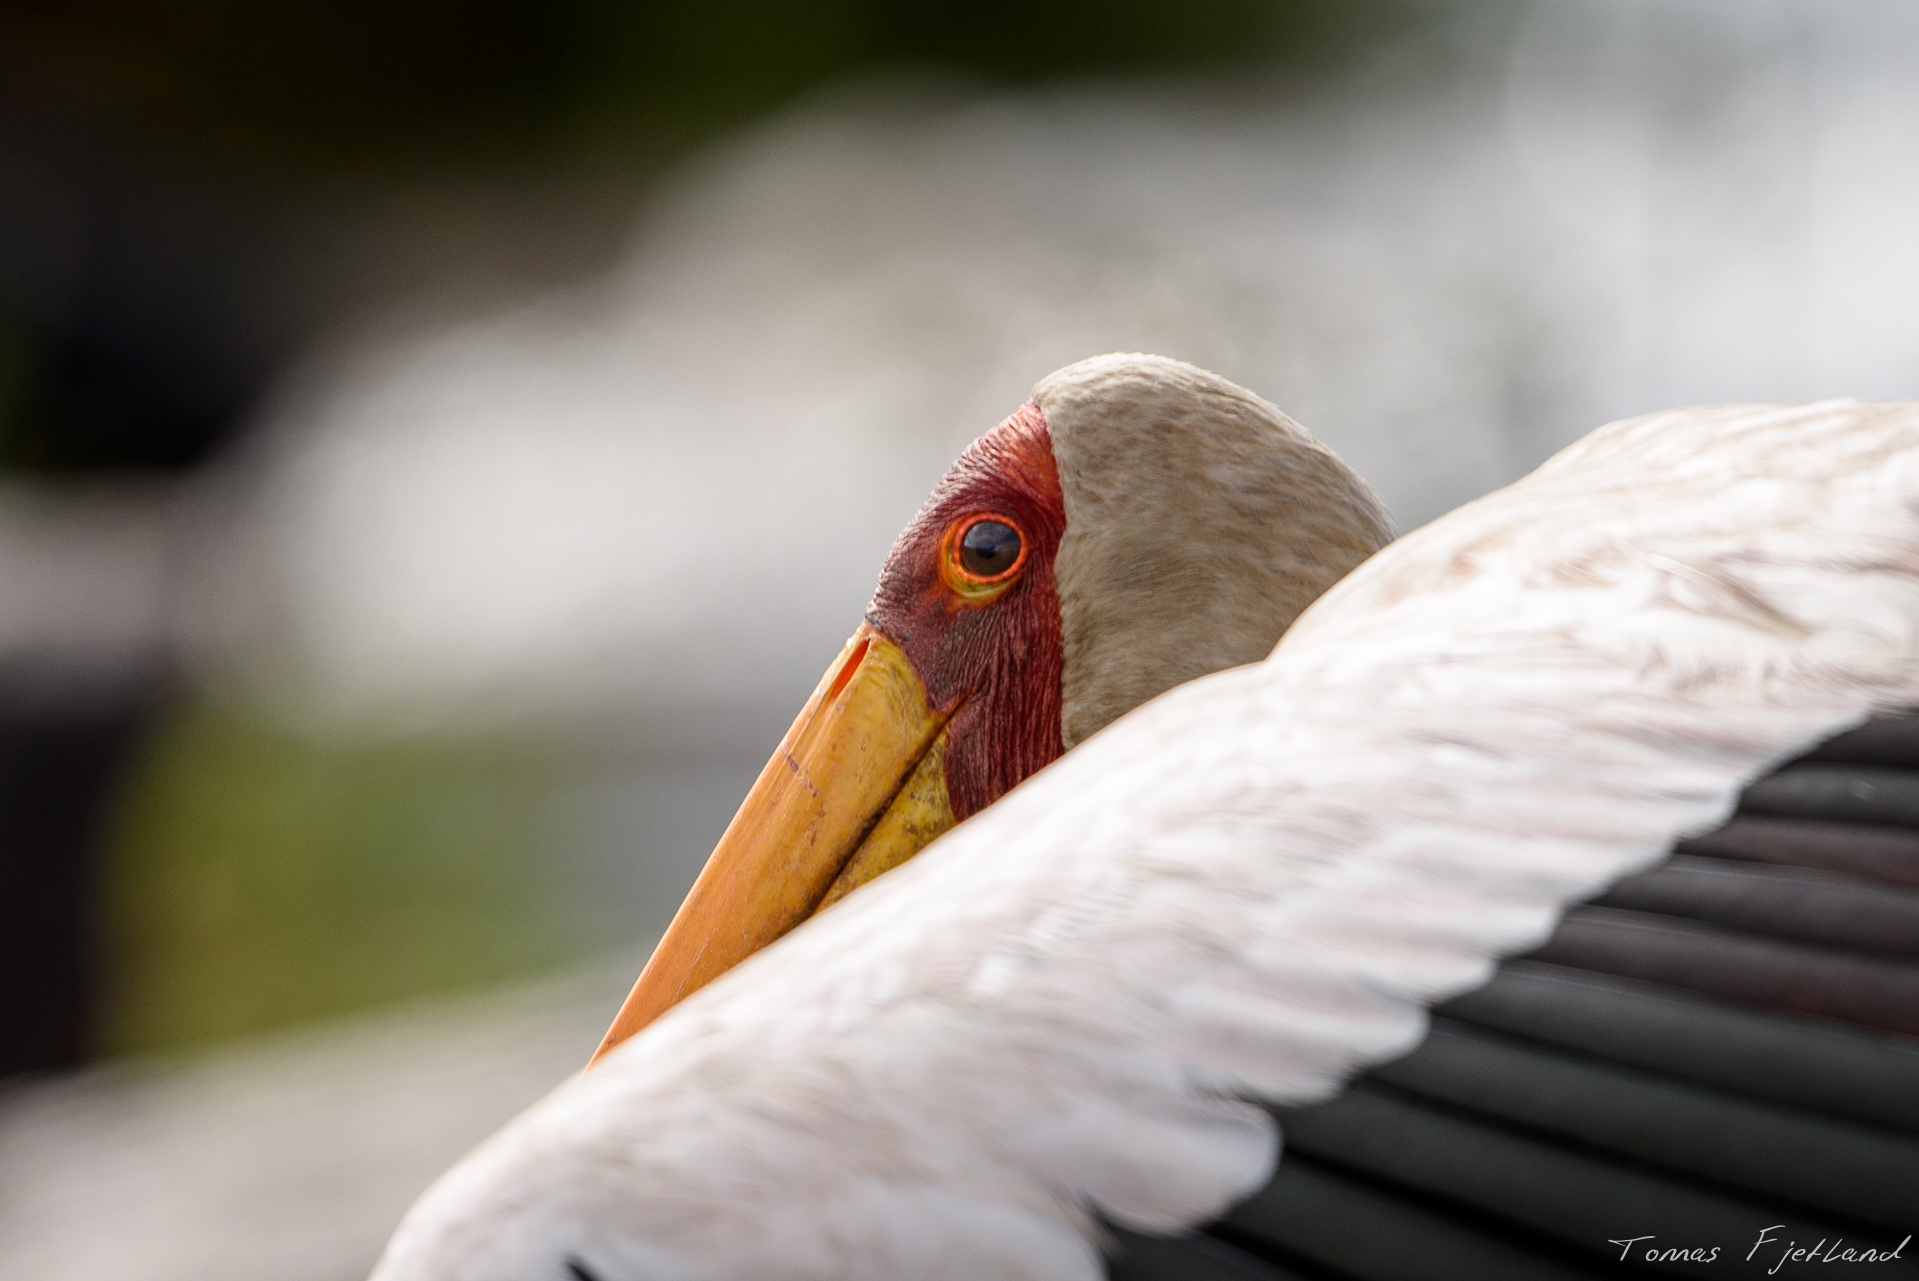 A Yellow-billed stork looks back at me over its outstretched wing